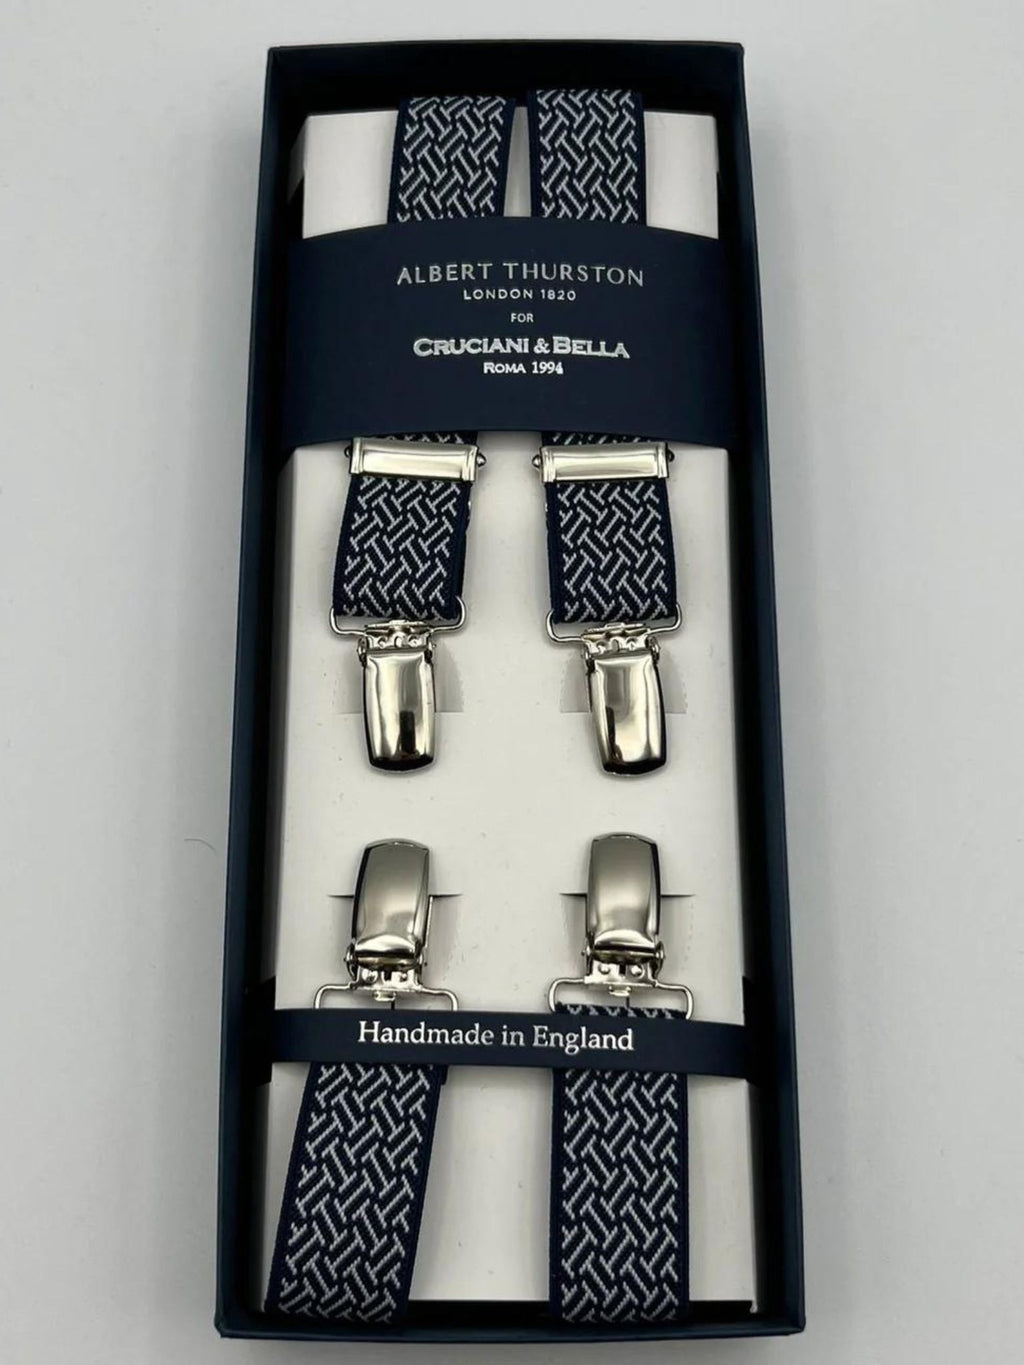 Albert Thurston for Cruciani & Bella Made in England Clip on Adjustable Sizing 25 mm elastic braces Blue and White Motif X-Shaped Nickel Fittings Size: L